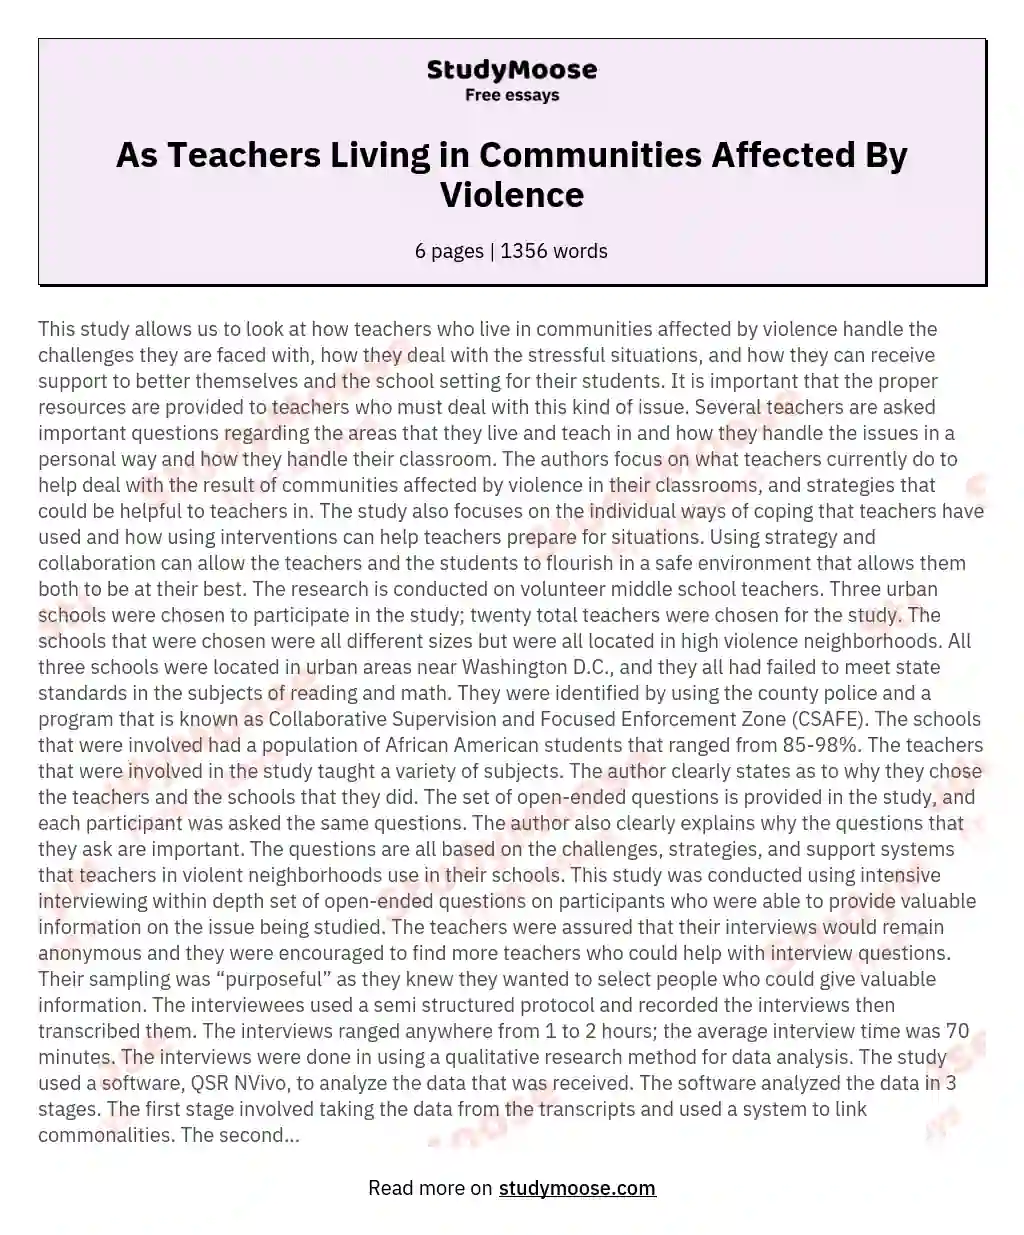 As Teachers Living in Communities Affected By Violence essay